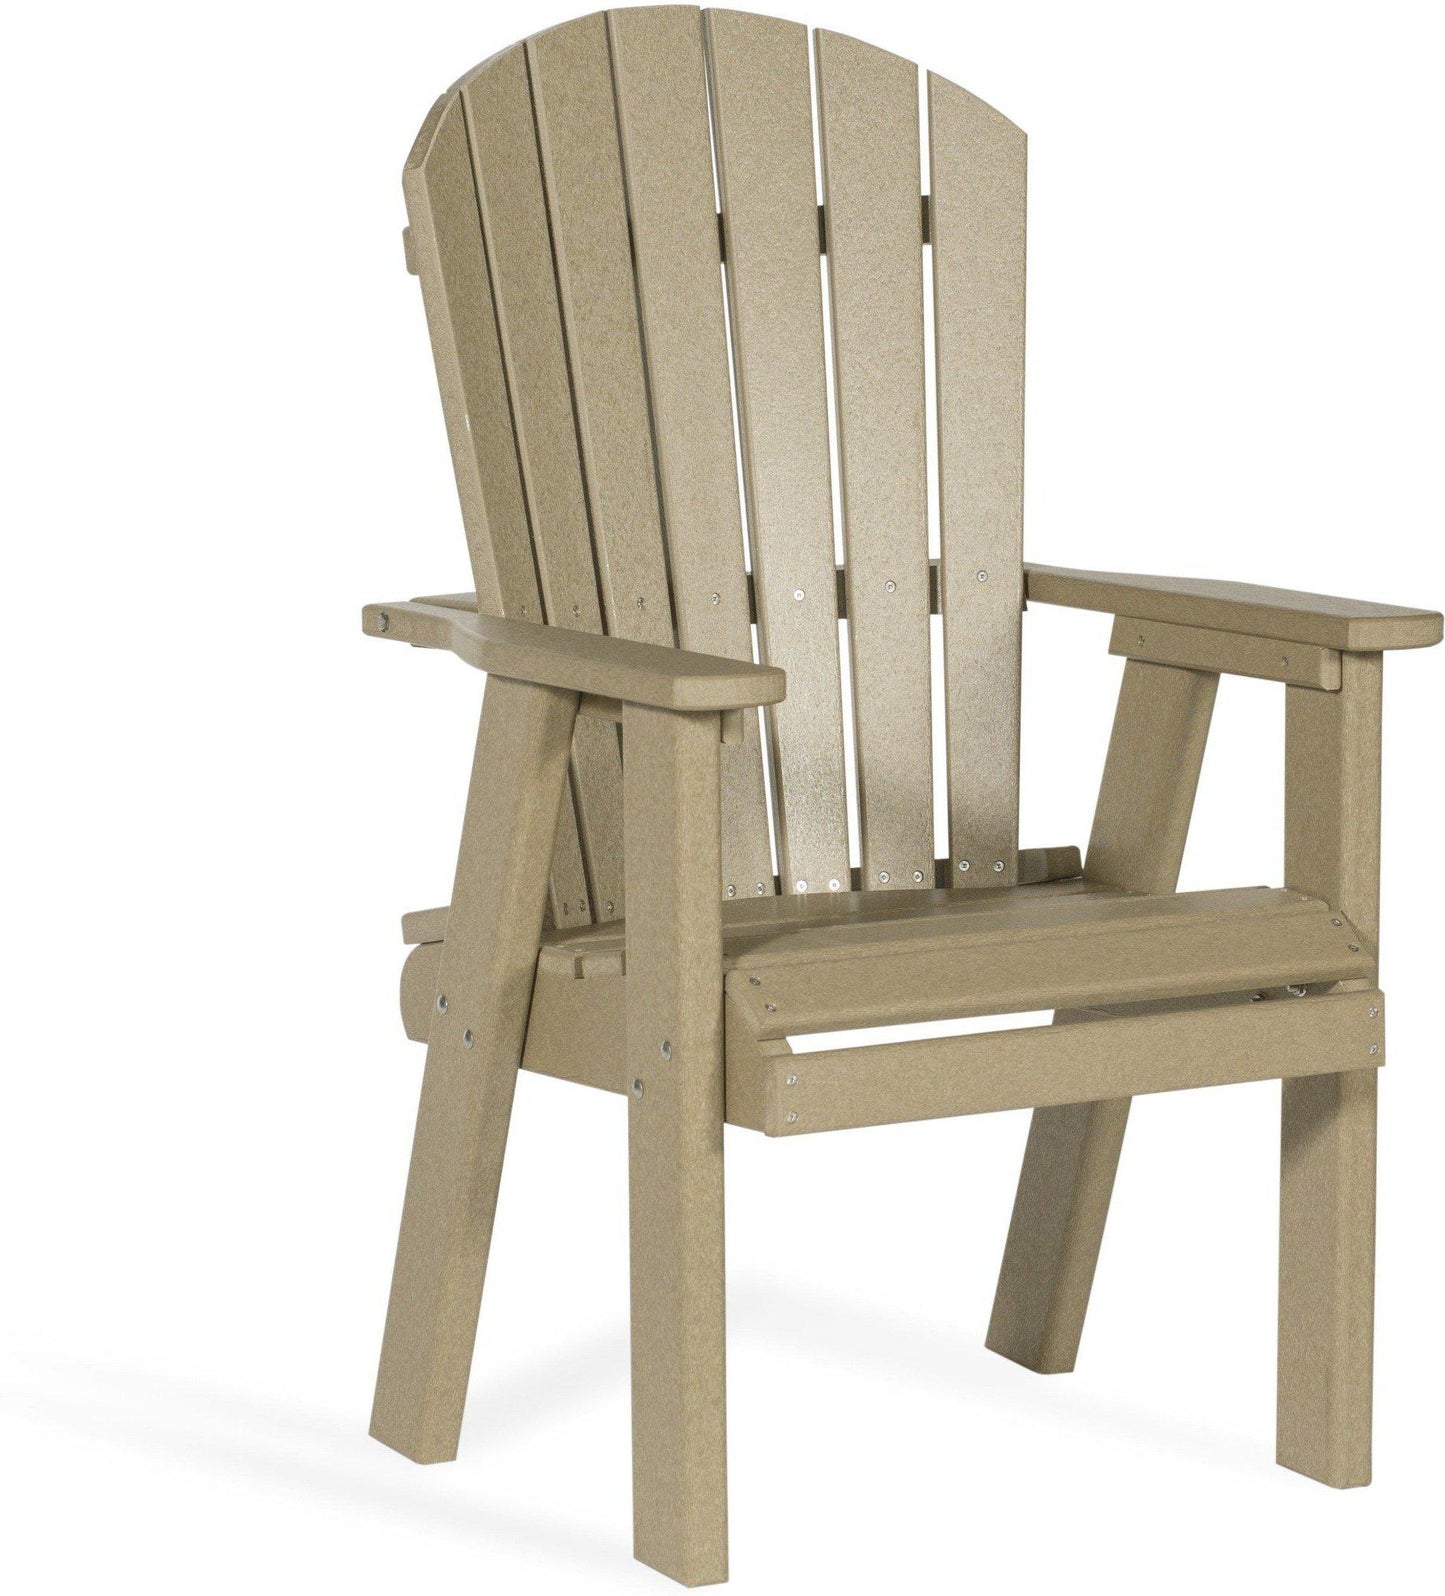 Leisure Lawns Amish Made Recycled Plastic Bistro Chair Model 321D (Dining Height) - LEAD TIME TO SHIP 4 WEEKS OR LESS